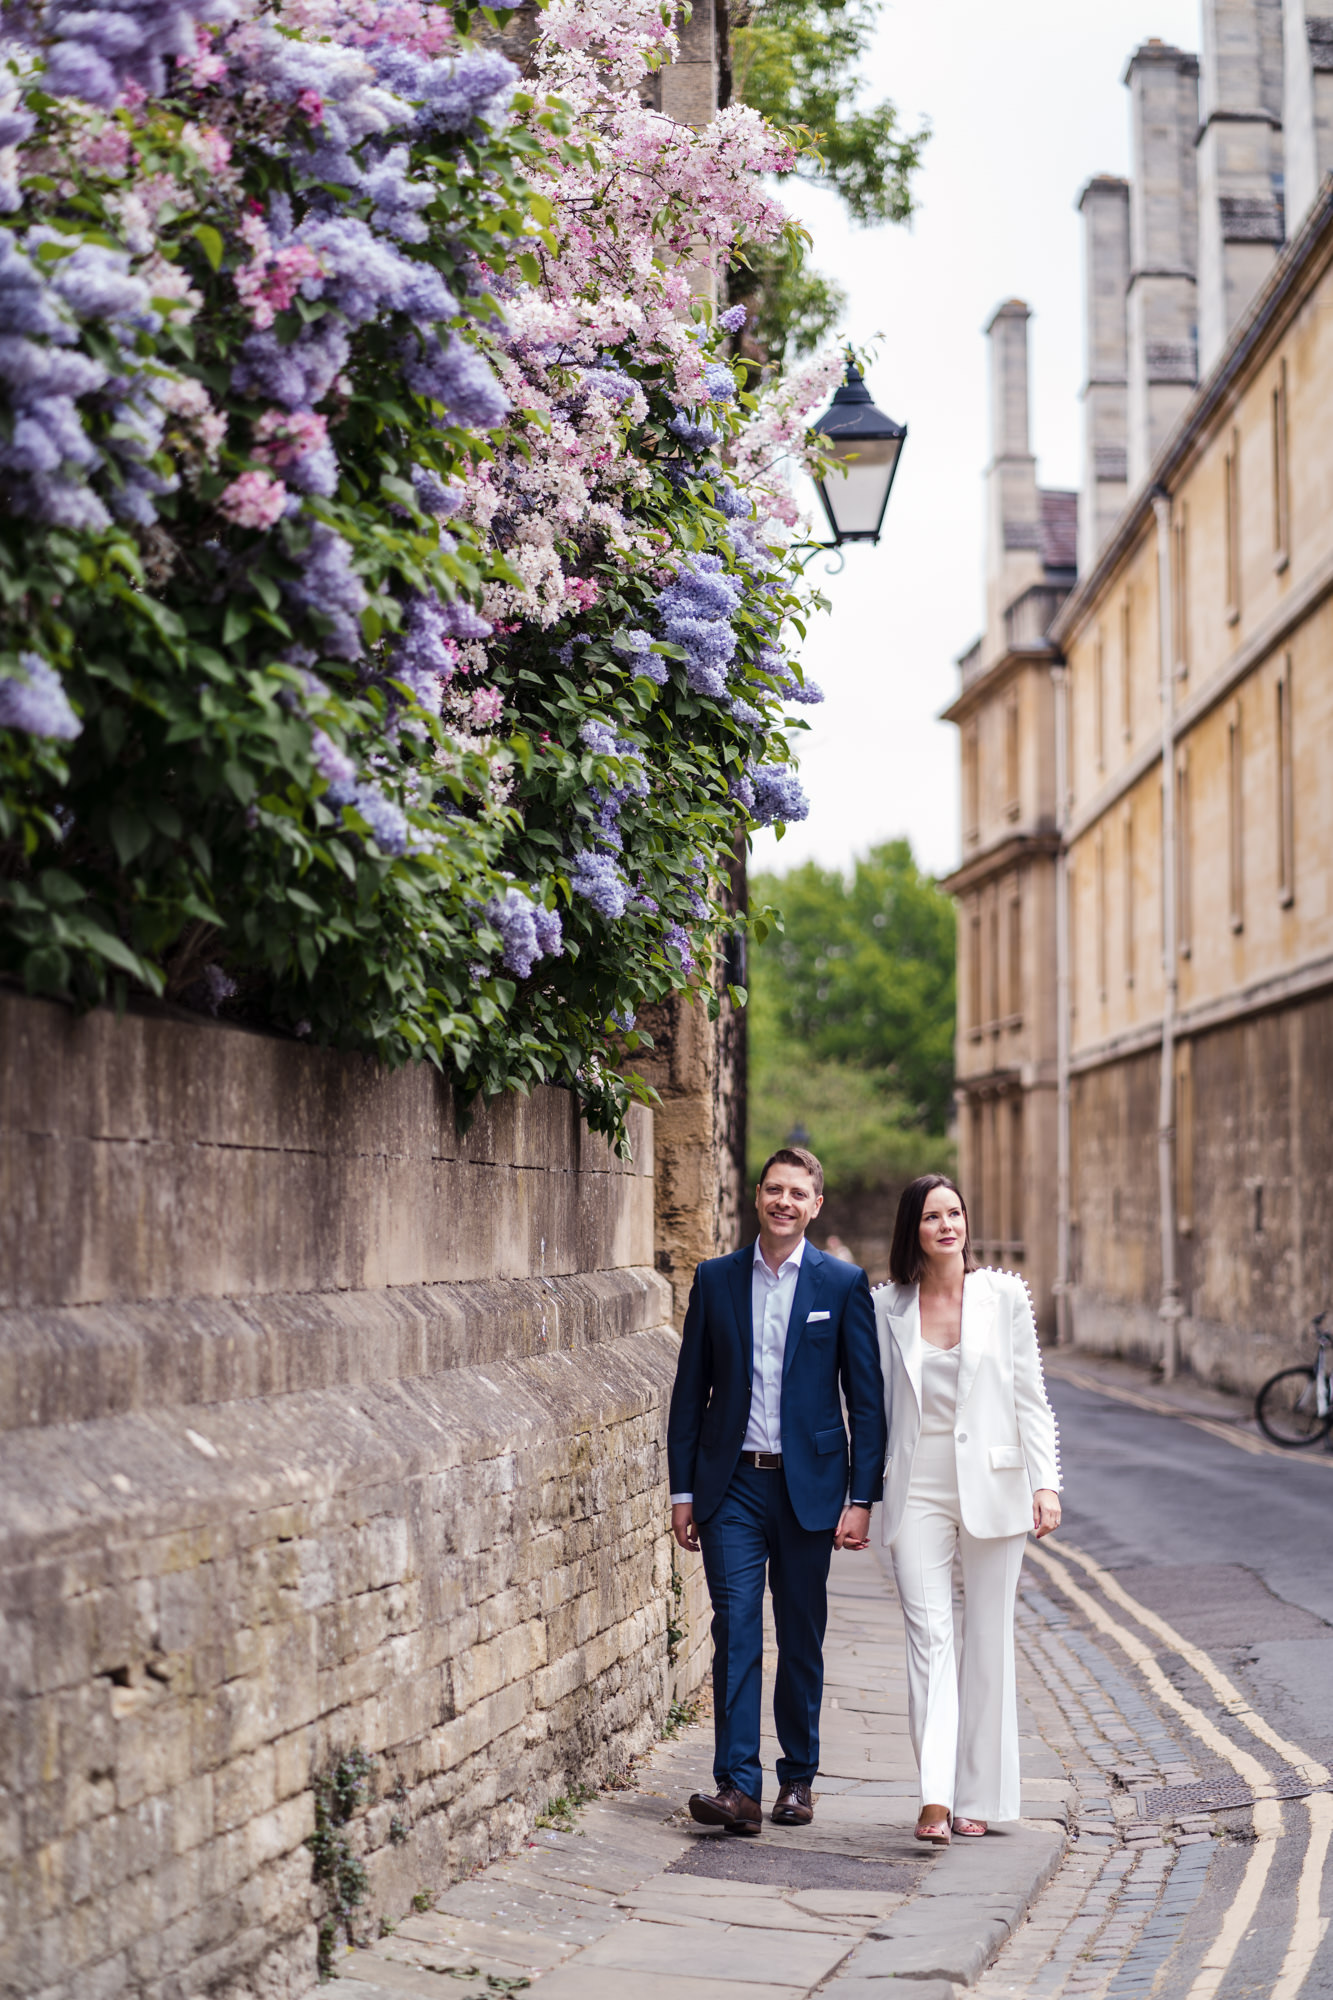 bride and groom walk alongside a wall with purple and blue flowers for modern couple wedding portrait in oxford city